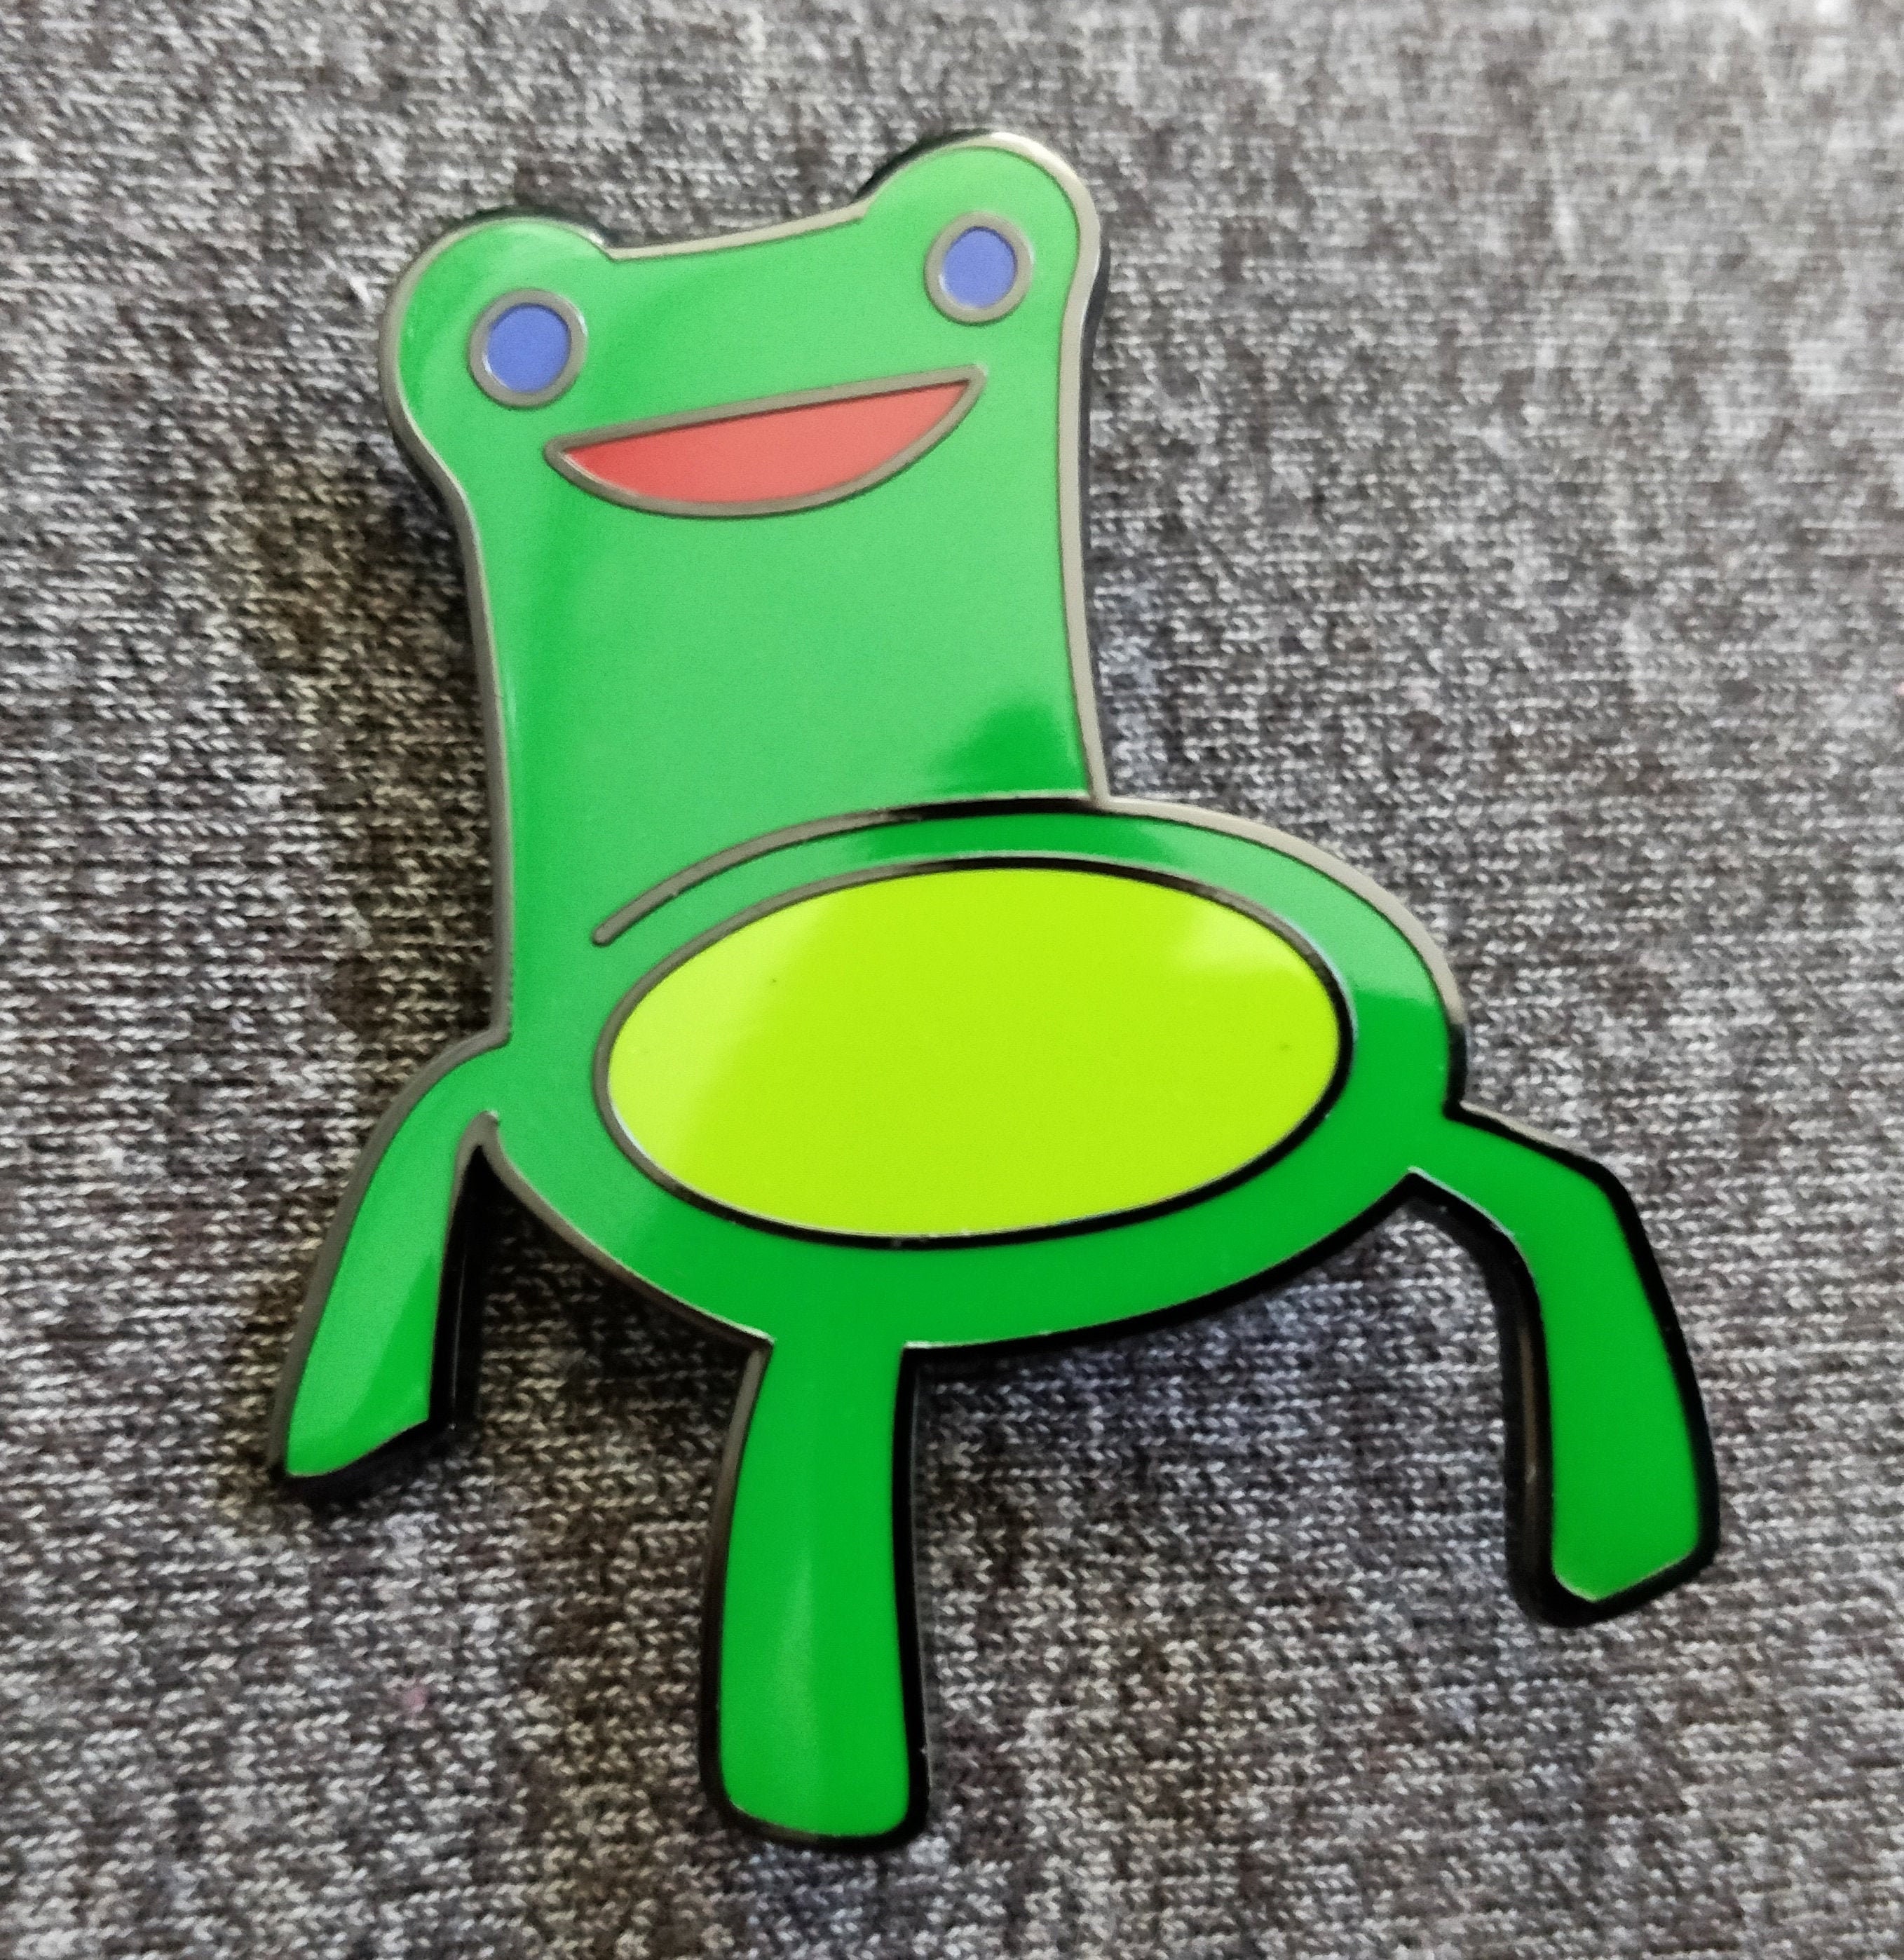 Minimalist Animal Crossing Froggy Chair For Sale for Small Space